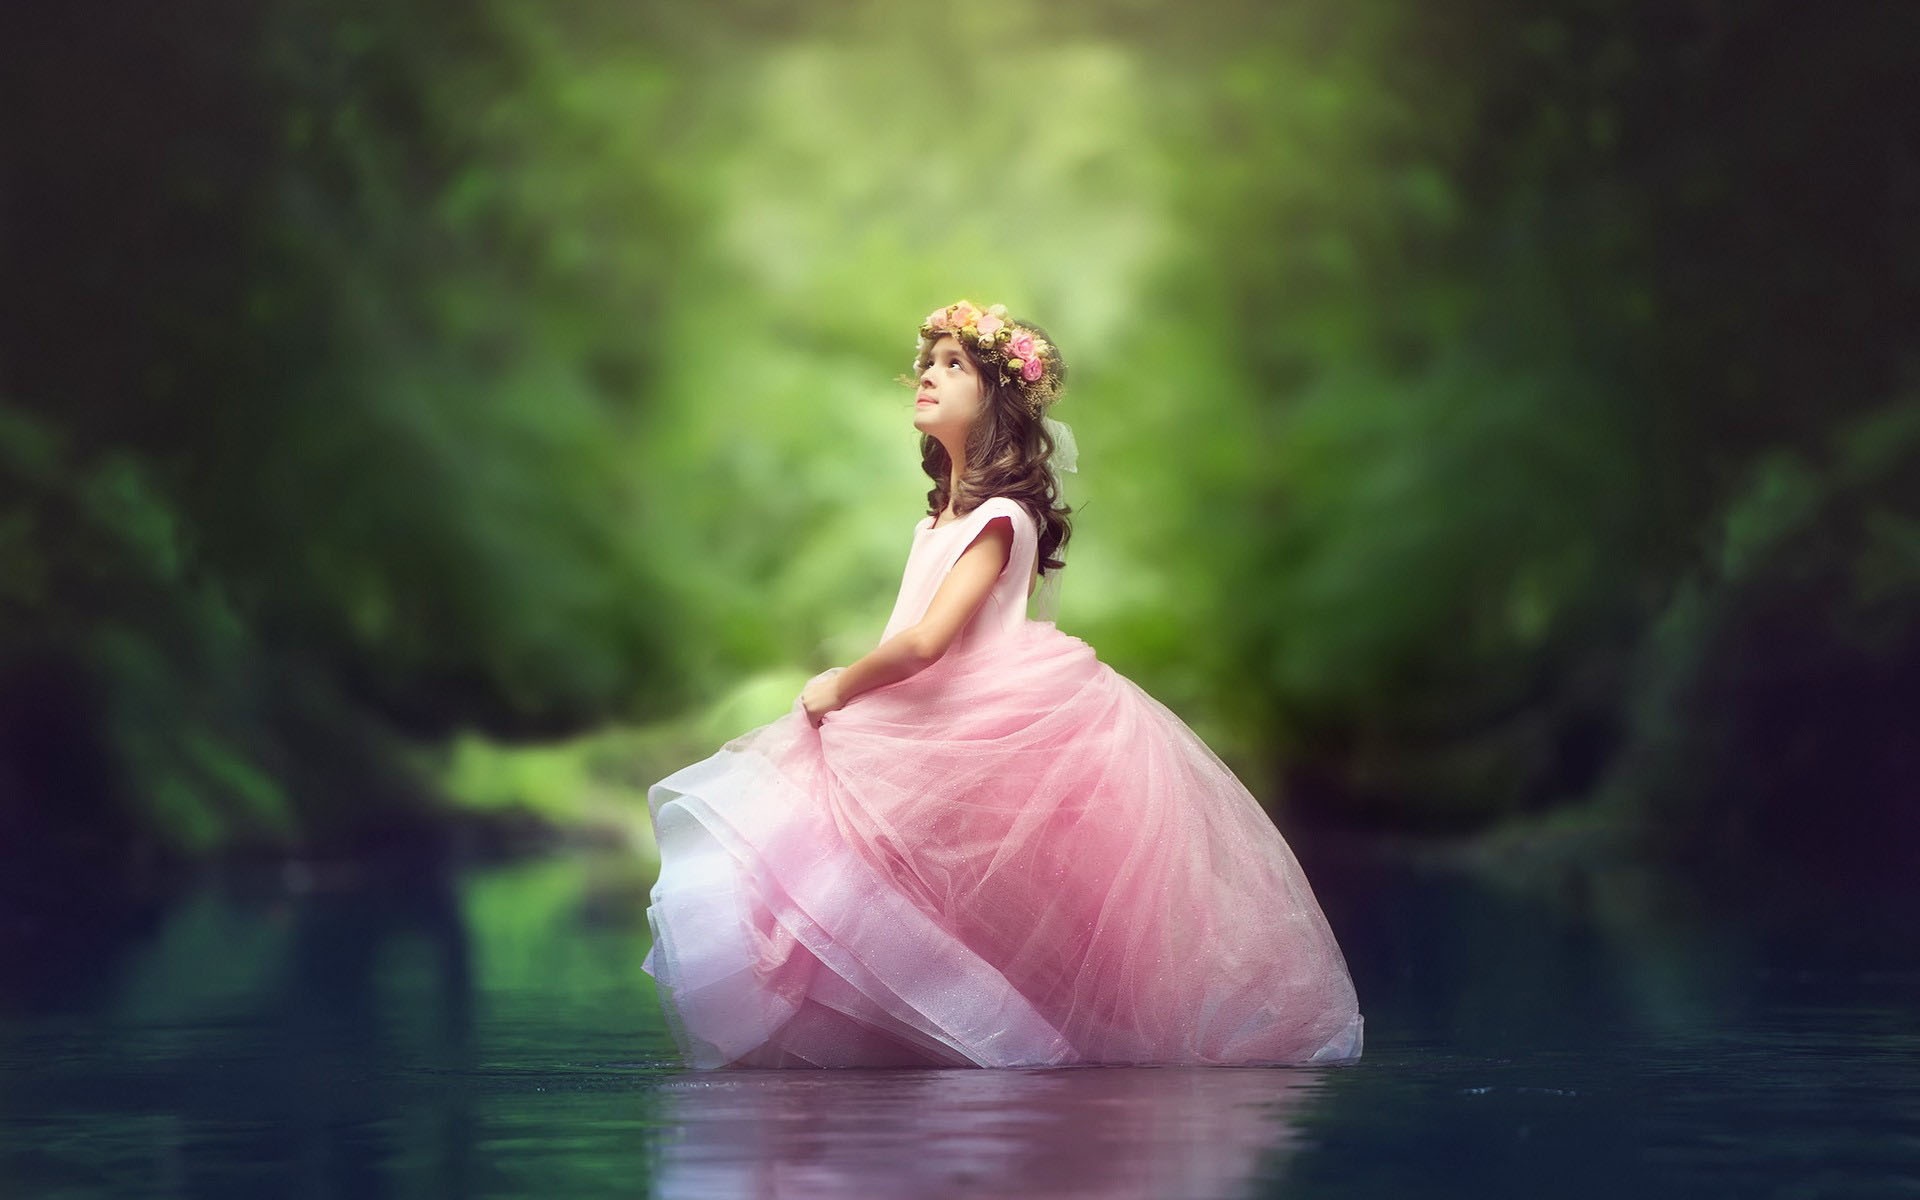 Little, Princess, Girl, In, River, Widescreen, Background ...